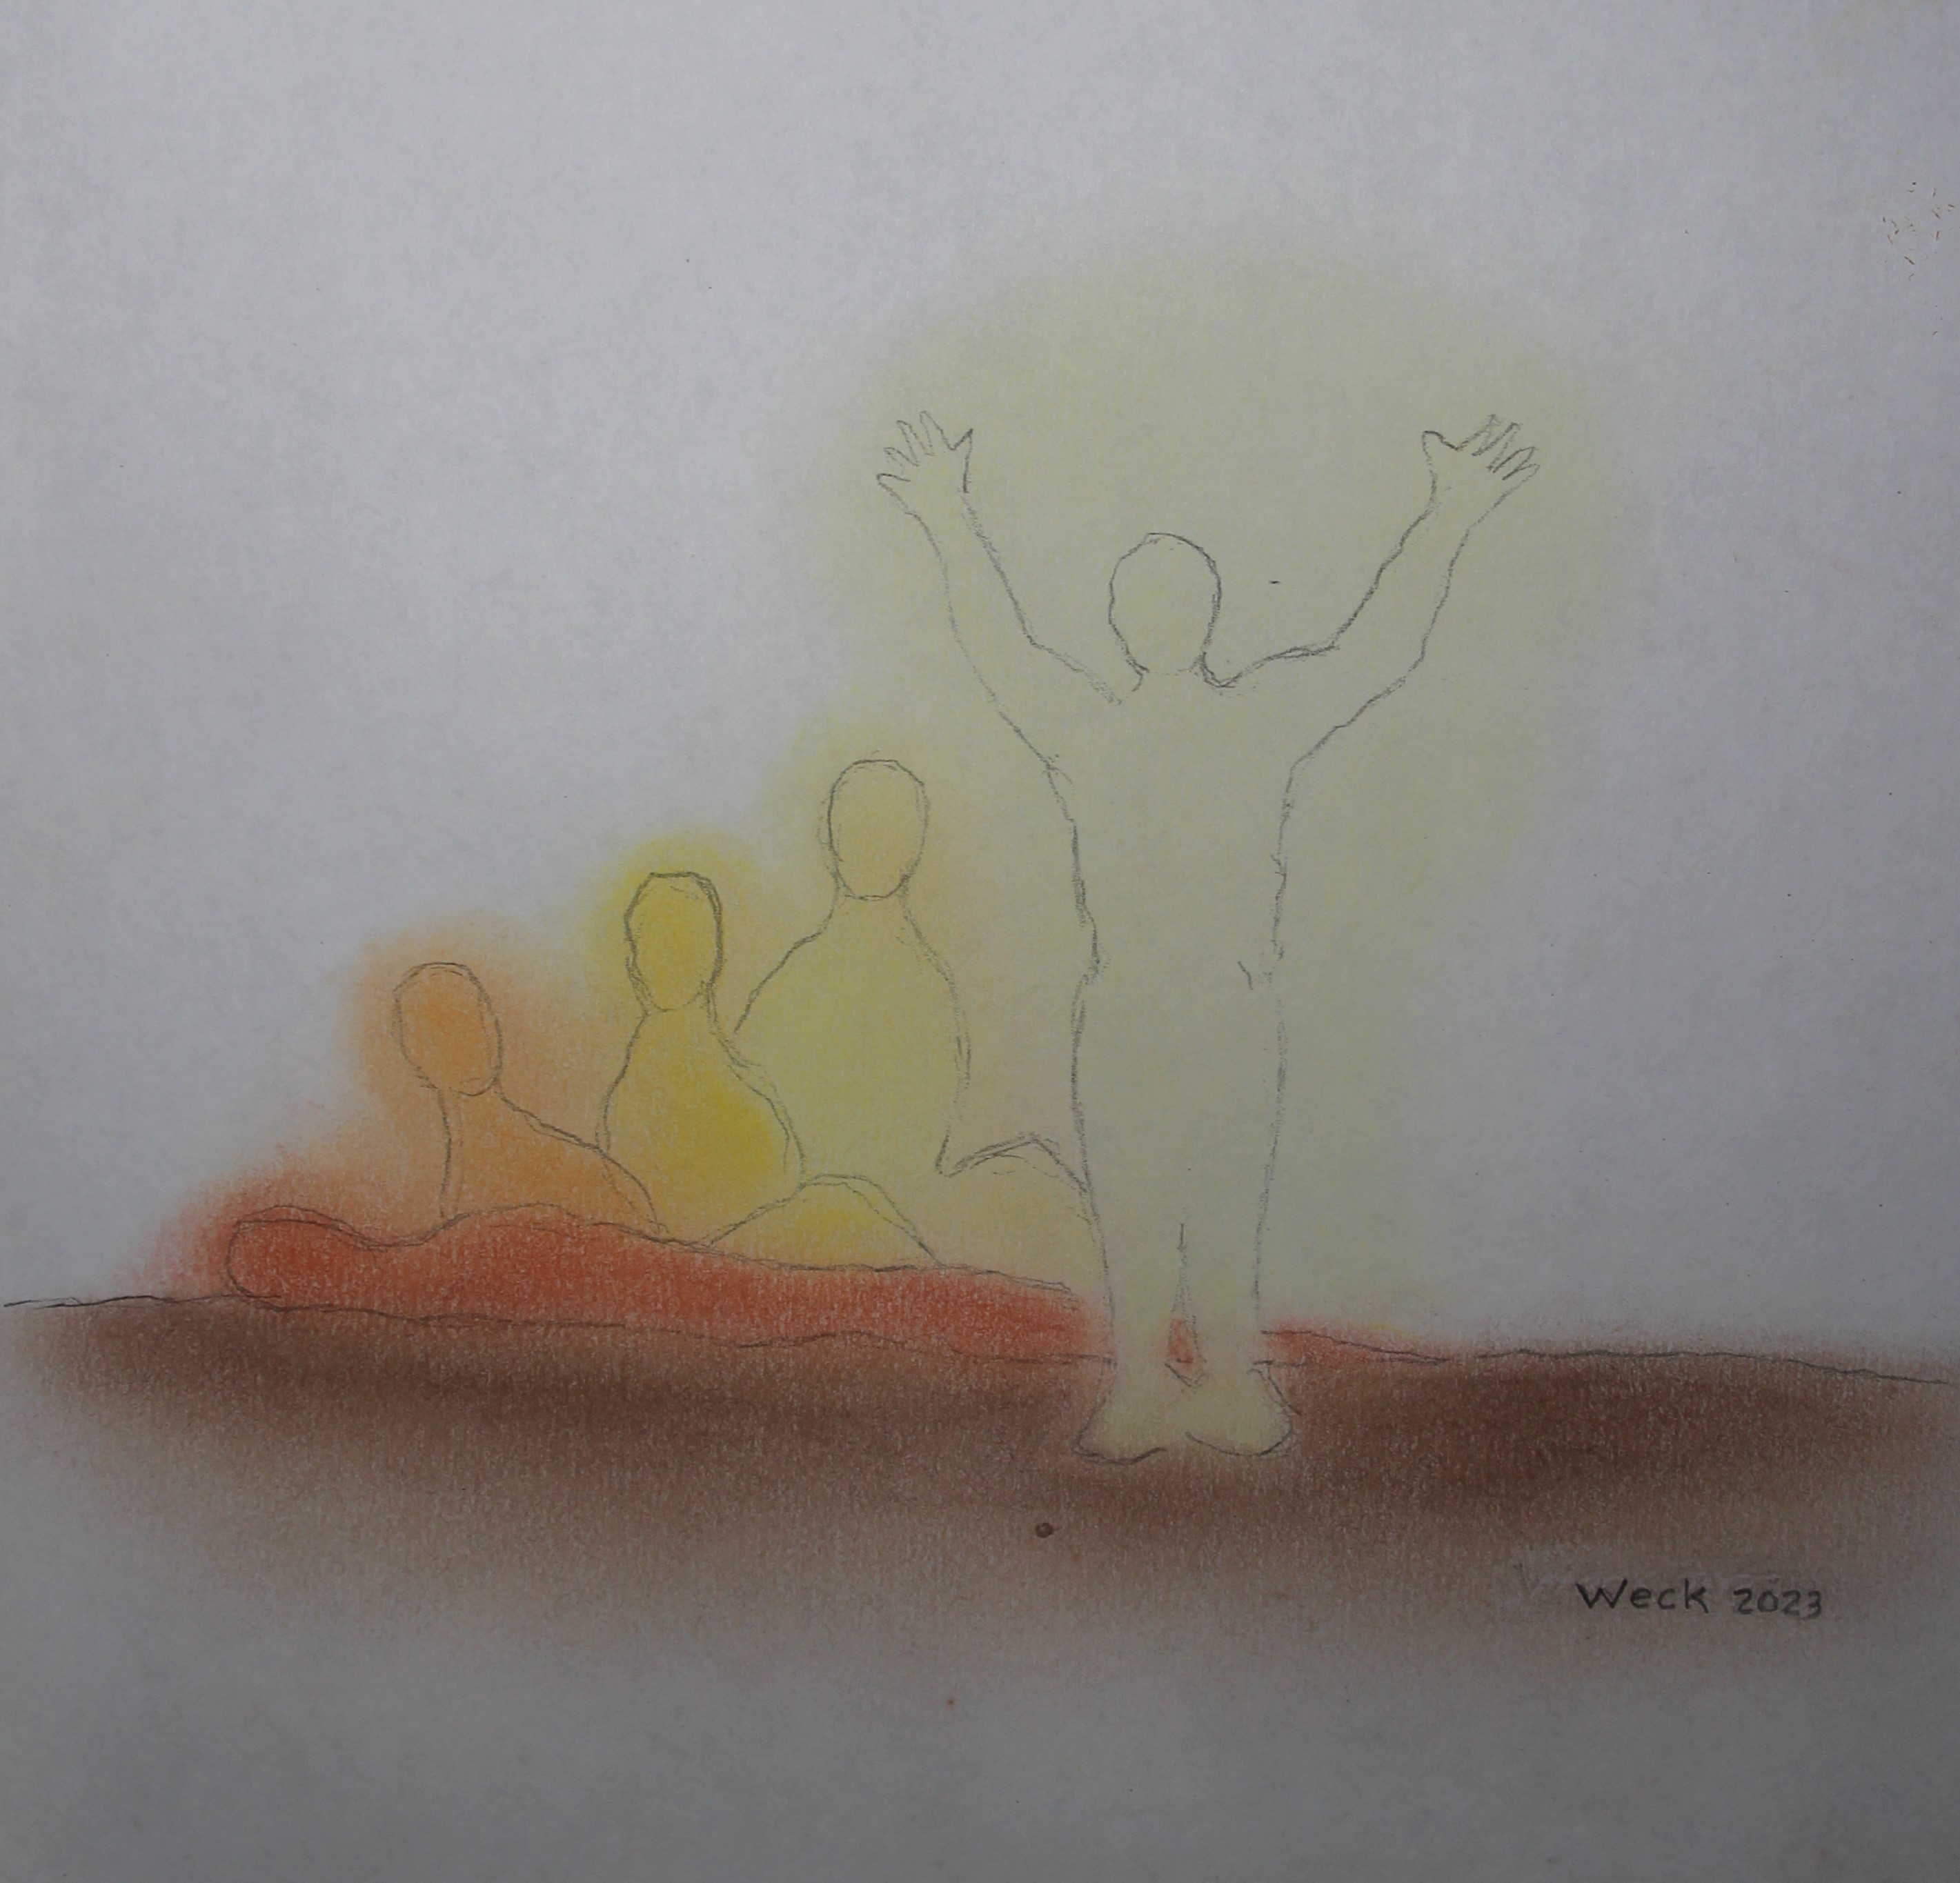 A pencil sketch of four human figures. One figure stands with arms raised, while the other three are seated or lying down. The figures are highlighted in various shades of yellow and orange. The background is white with a blend of brown and red at the base, resembling a trinity scene. The text "Week 2023" is in the bottom right corner.